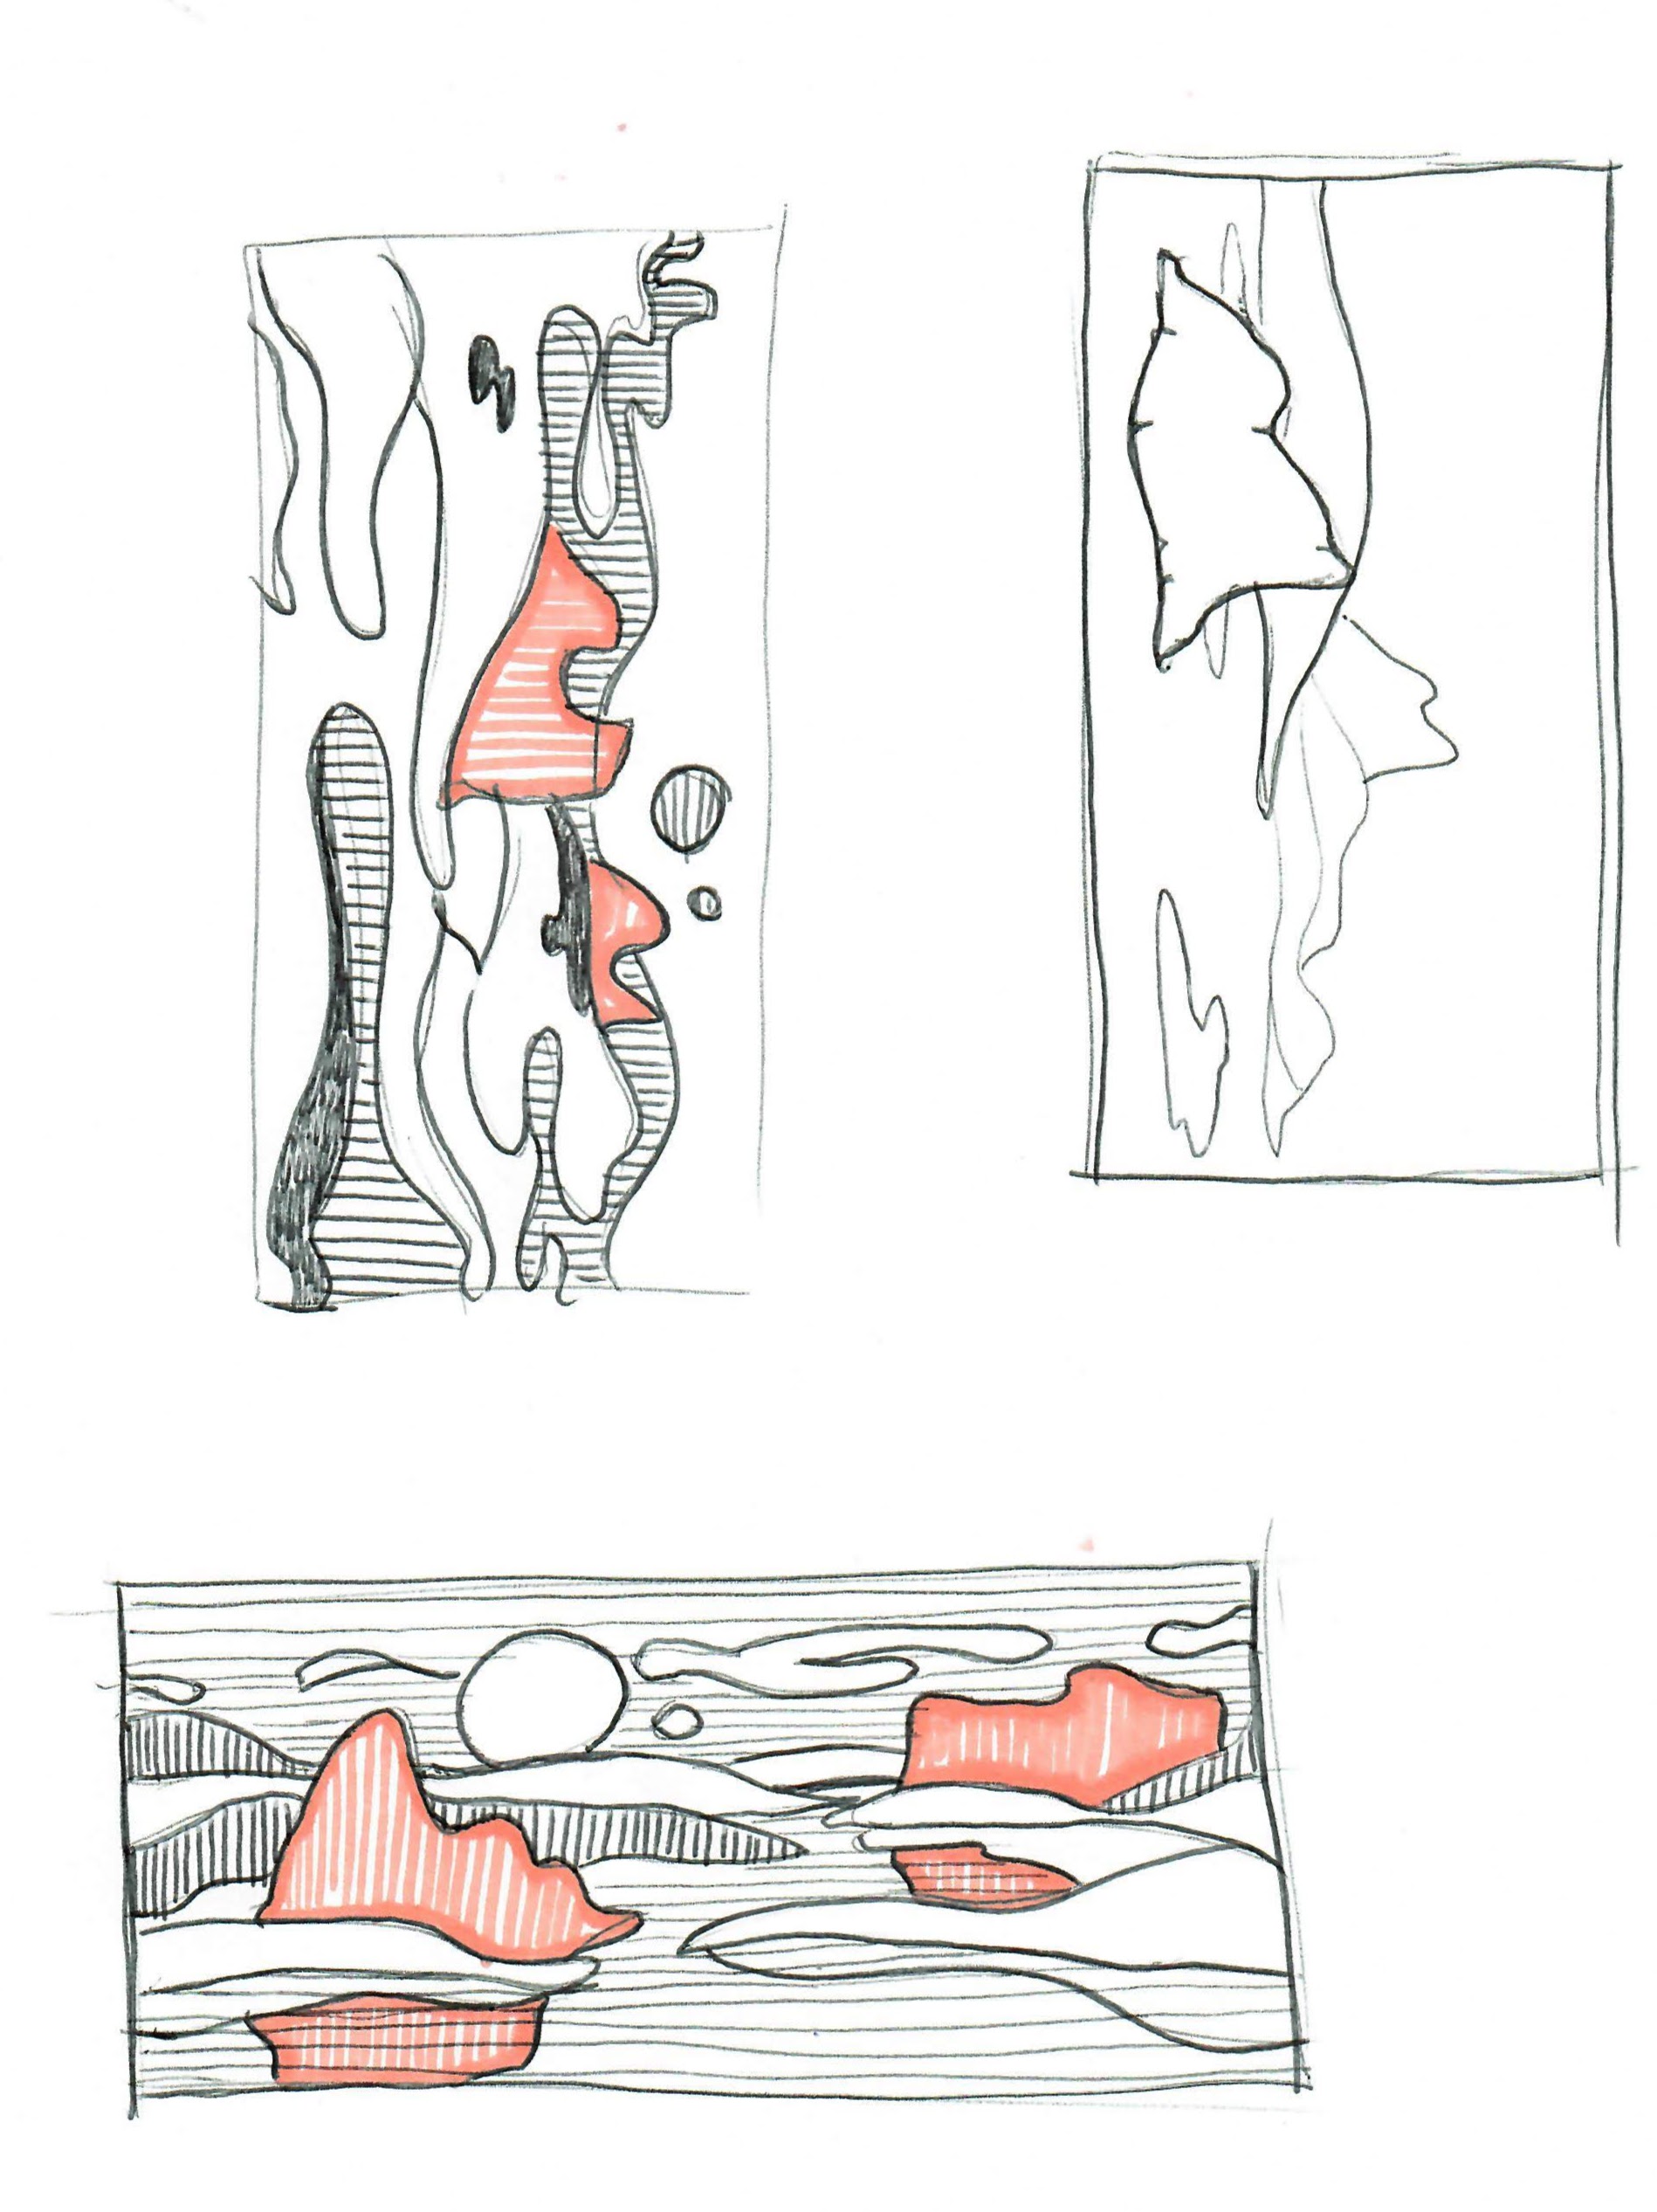 Sketches of abstract surrealist landscapes